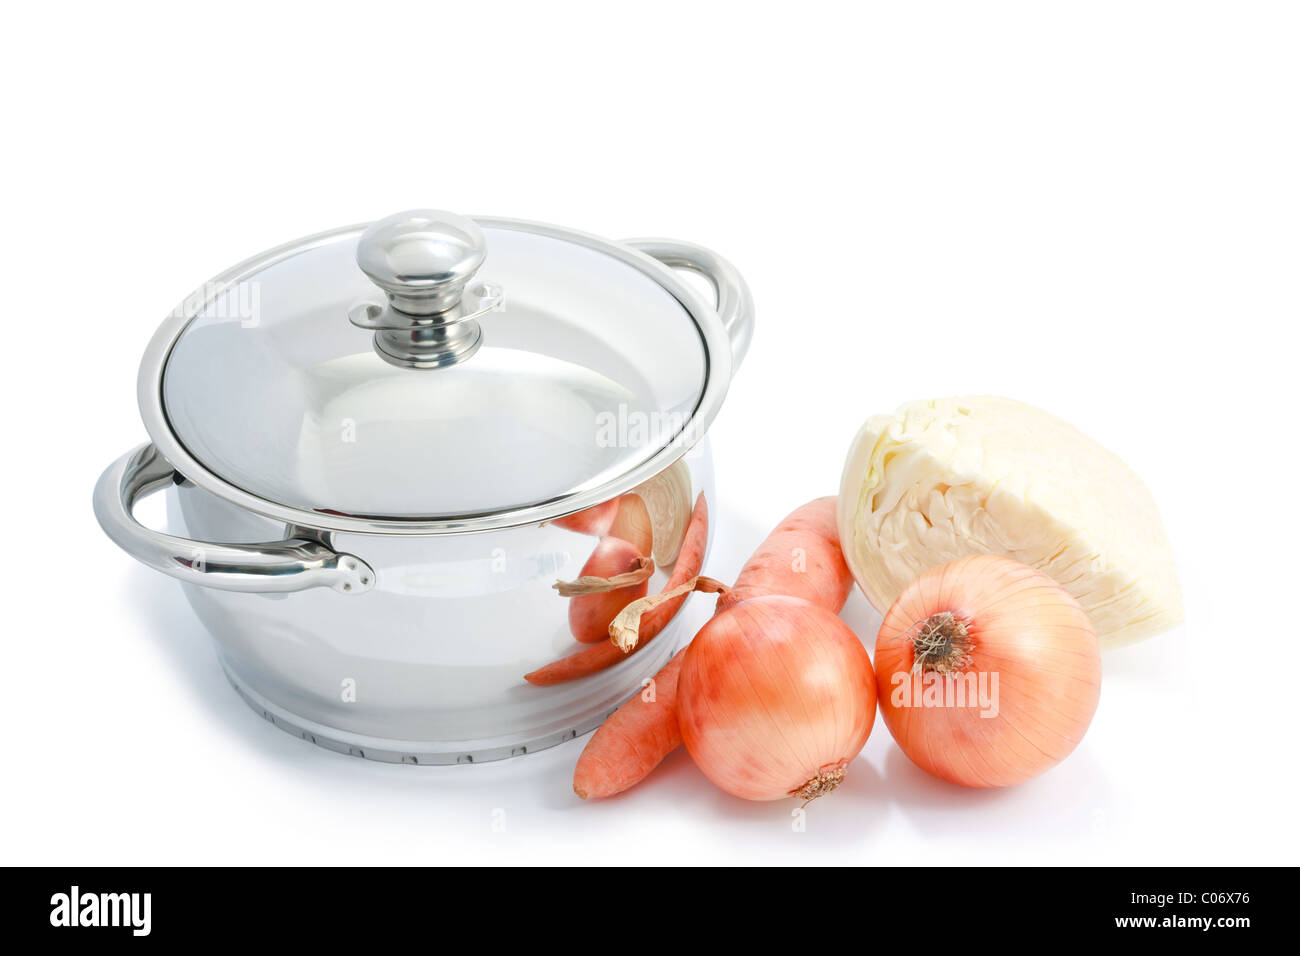 Stainless steel cooking pot, onion, carrot and cabbage isolated on white Stock Photo